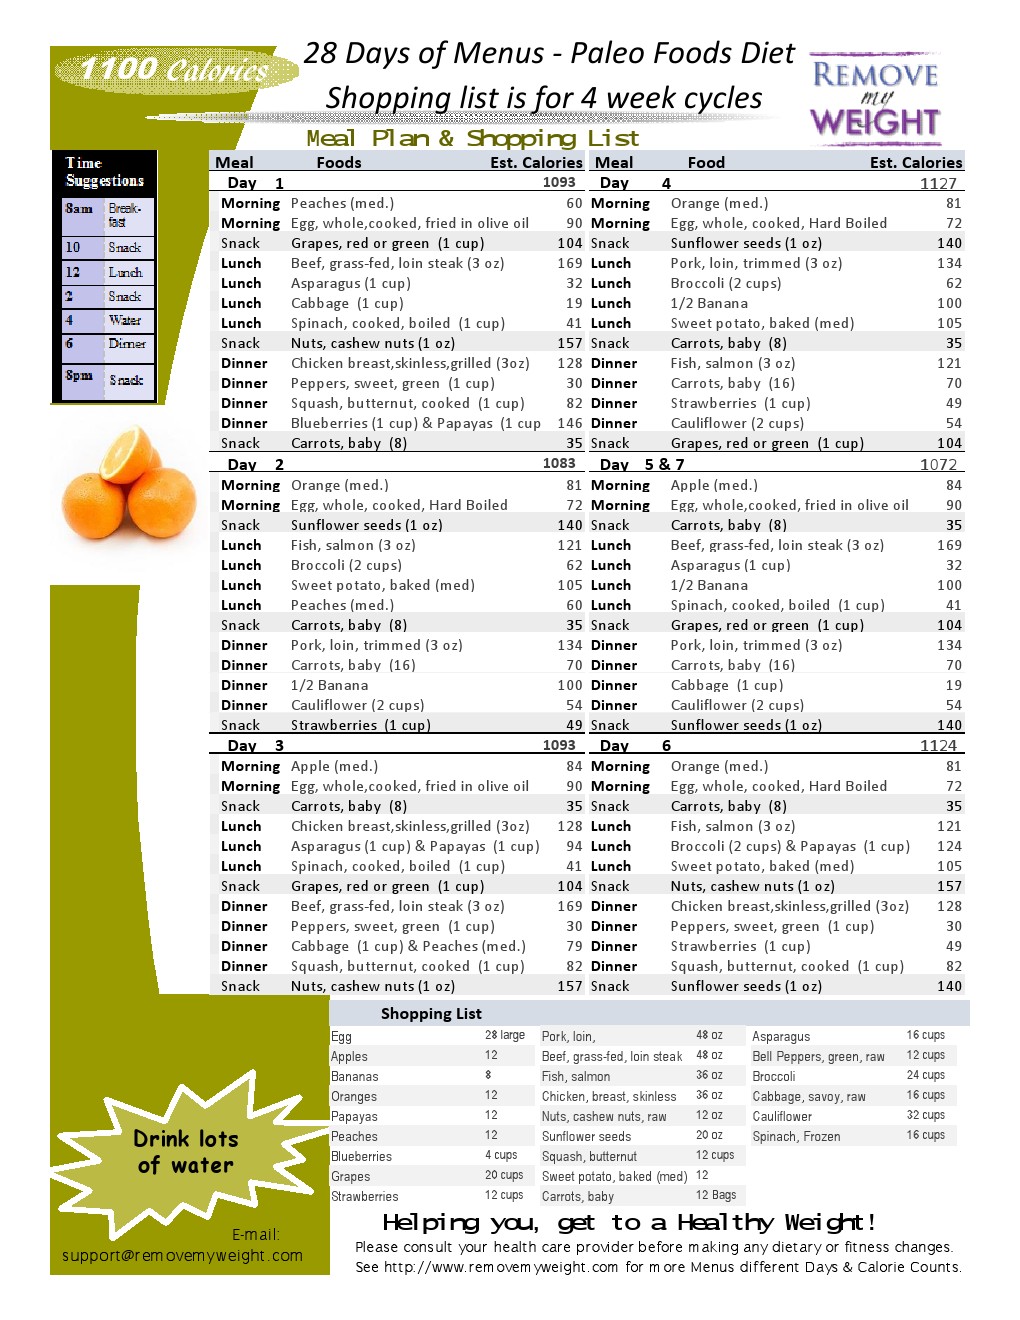 Free 1100 Calories A Day 28 Day Paleo Diet With Shopping List Printable Menu Plan For Weight 